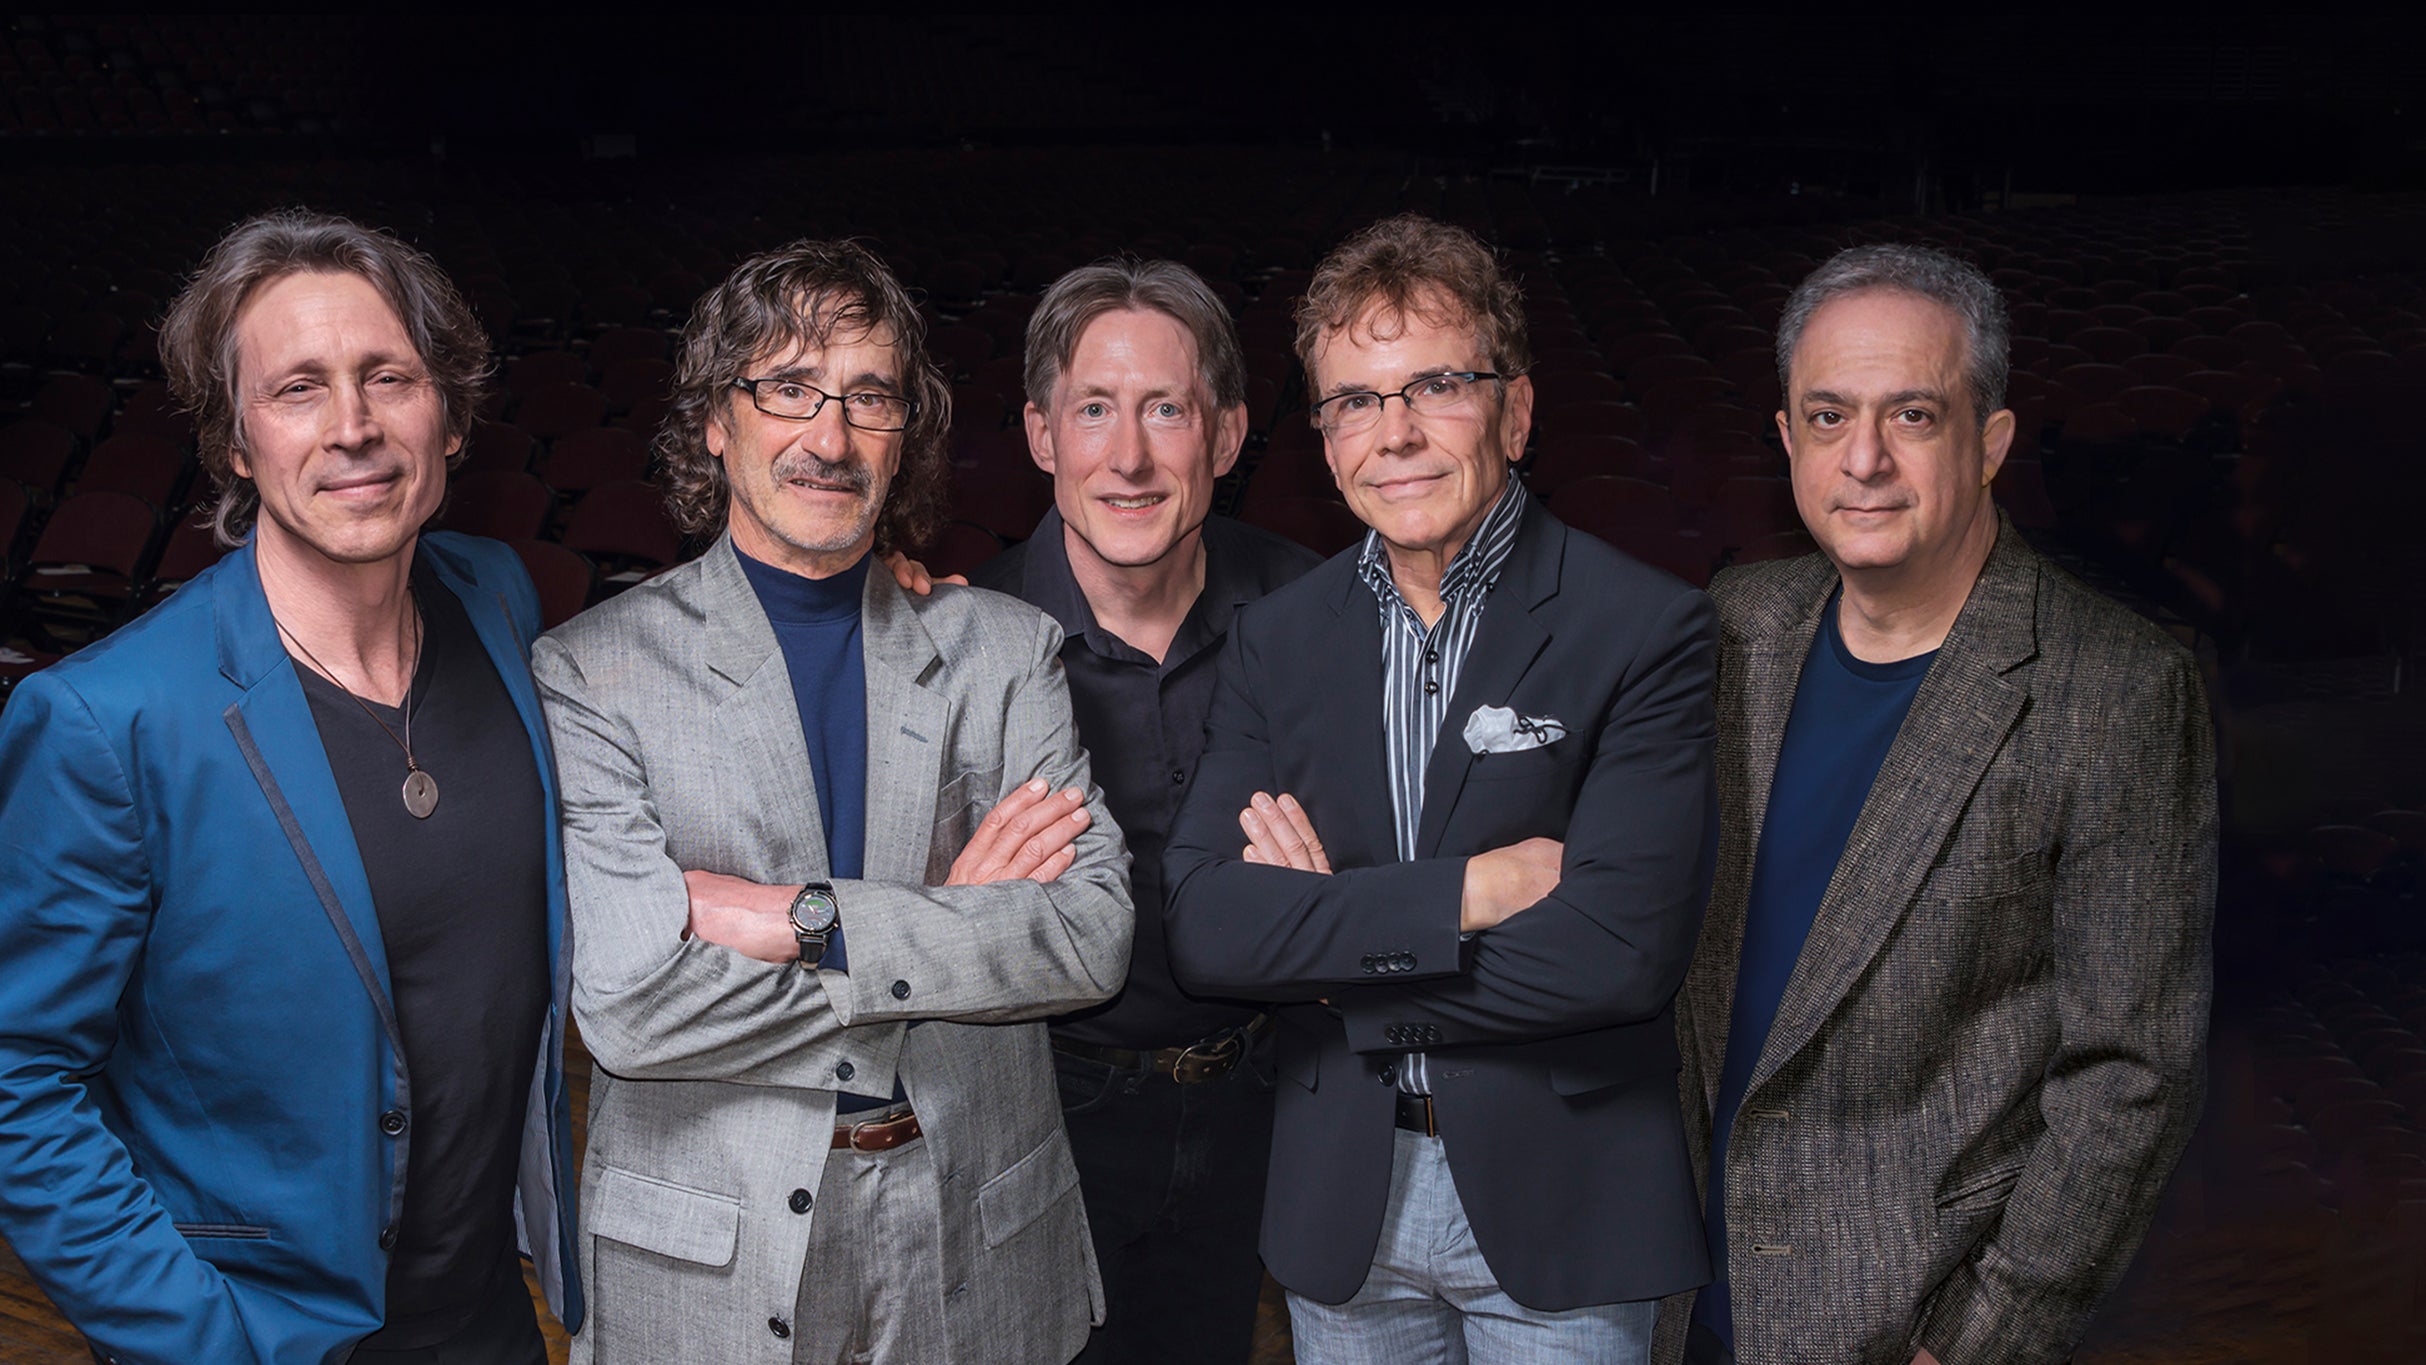 Donnie Iris & the Cruisers in Moon Township promo photo for Live Nation presale offer code